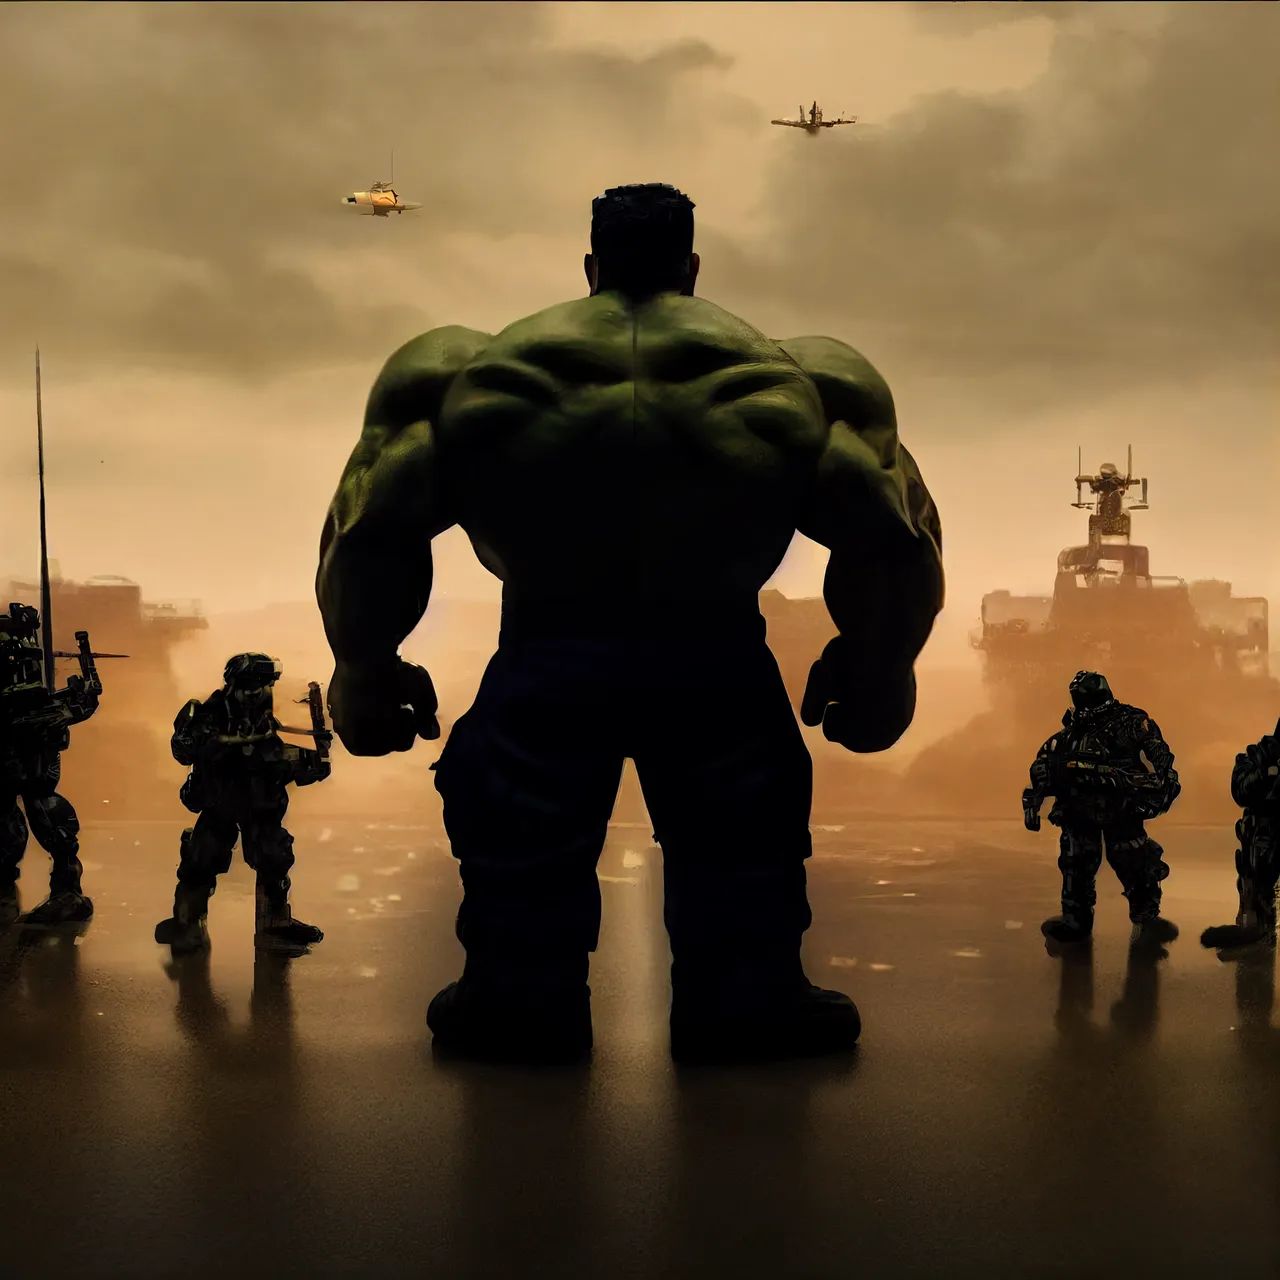 Ed_Privat_Baby_Hulk_standing_in_front_of_an_army_of_soldiers__w_12d4d96c-07c5-47ed-b405-73131a876e8c.png